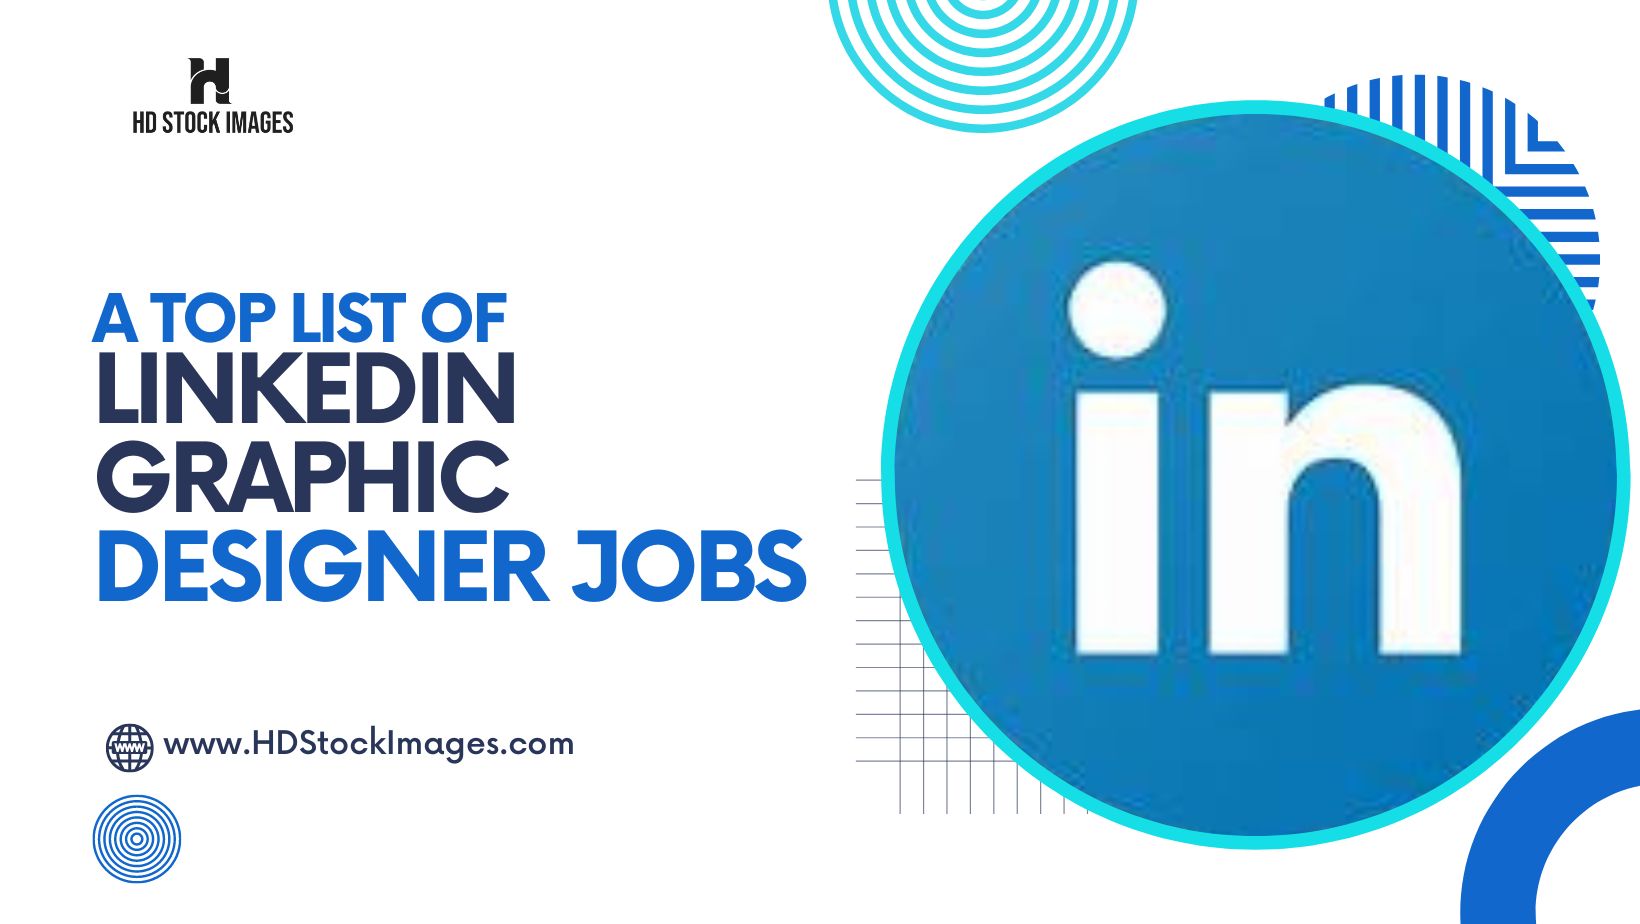 An image of A Top List of Linkedin Graphic Designer Jobs